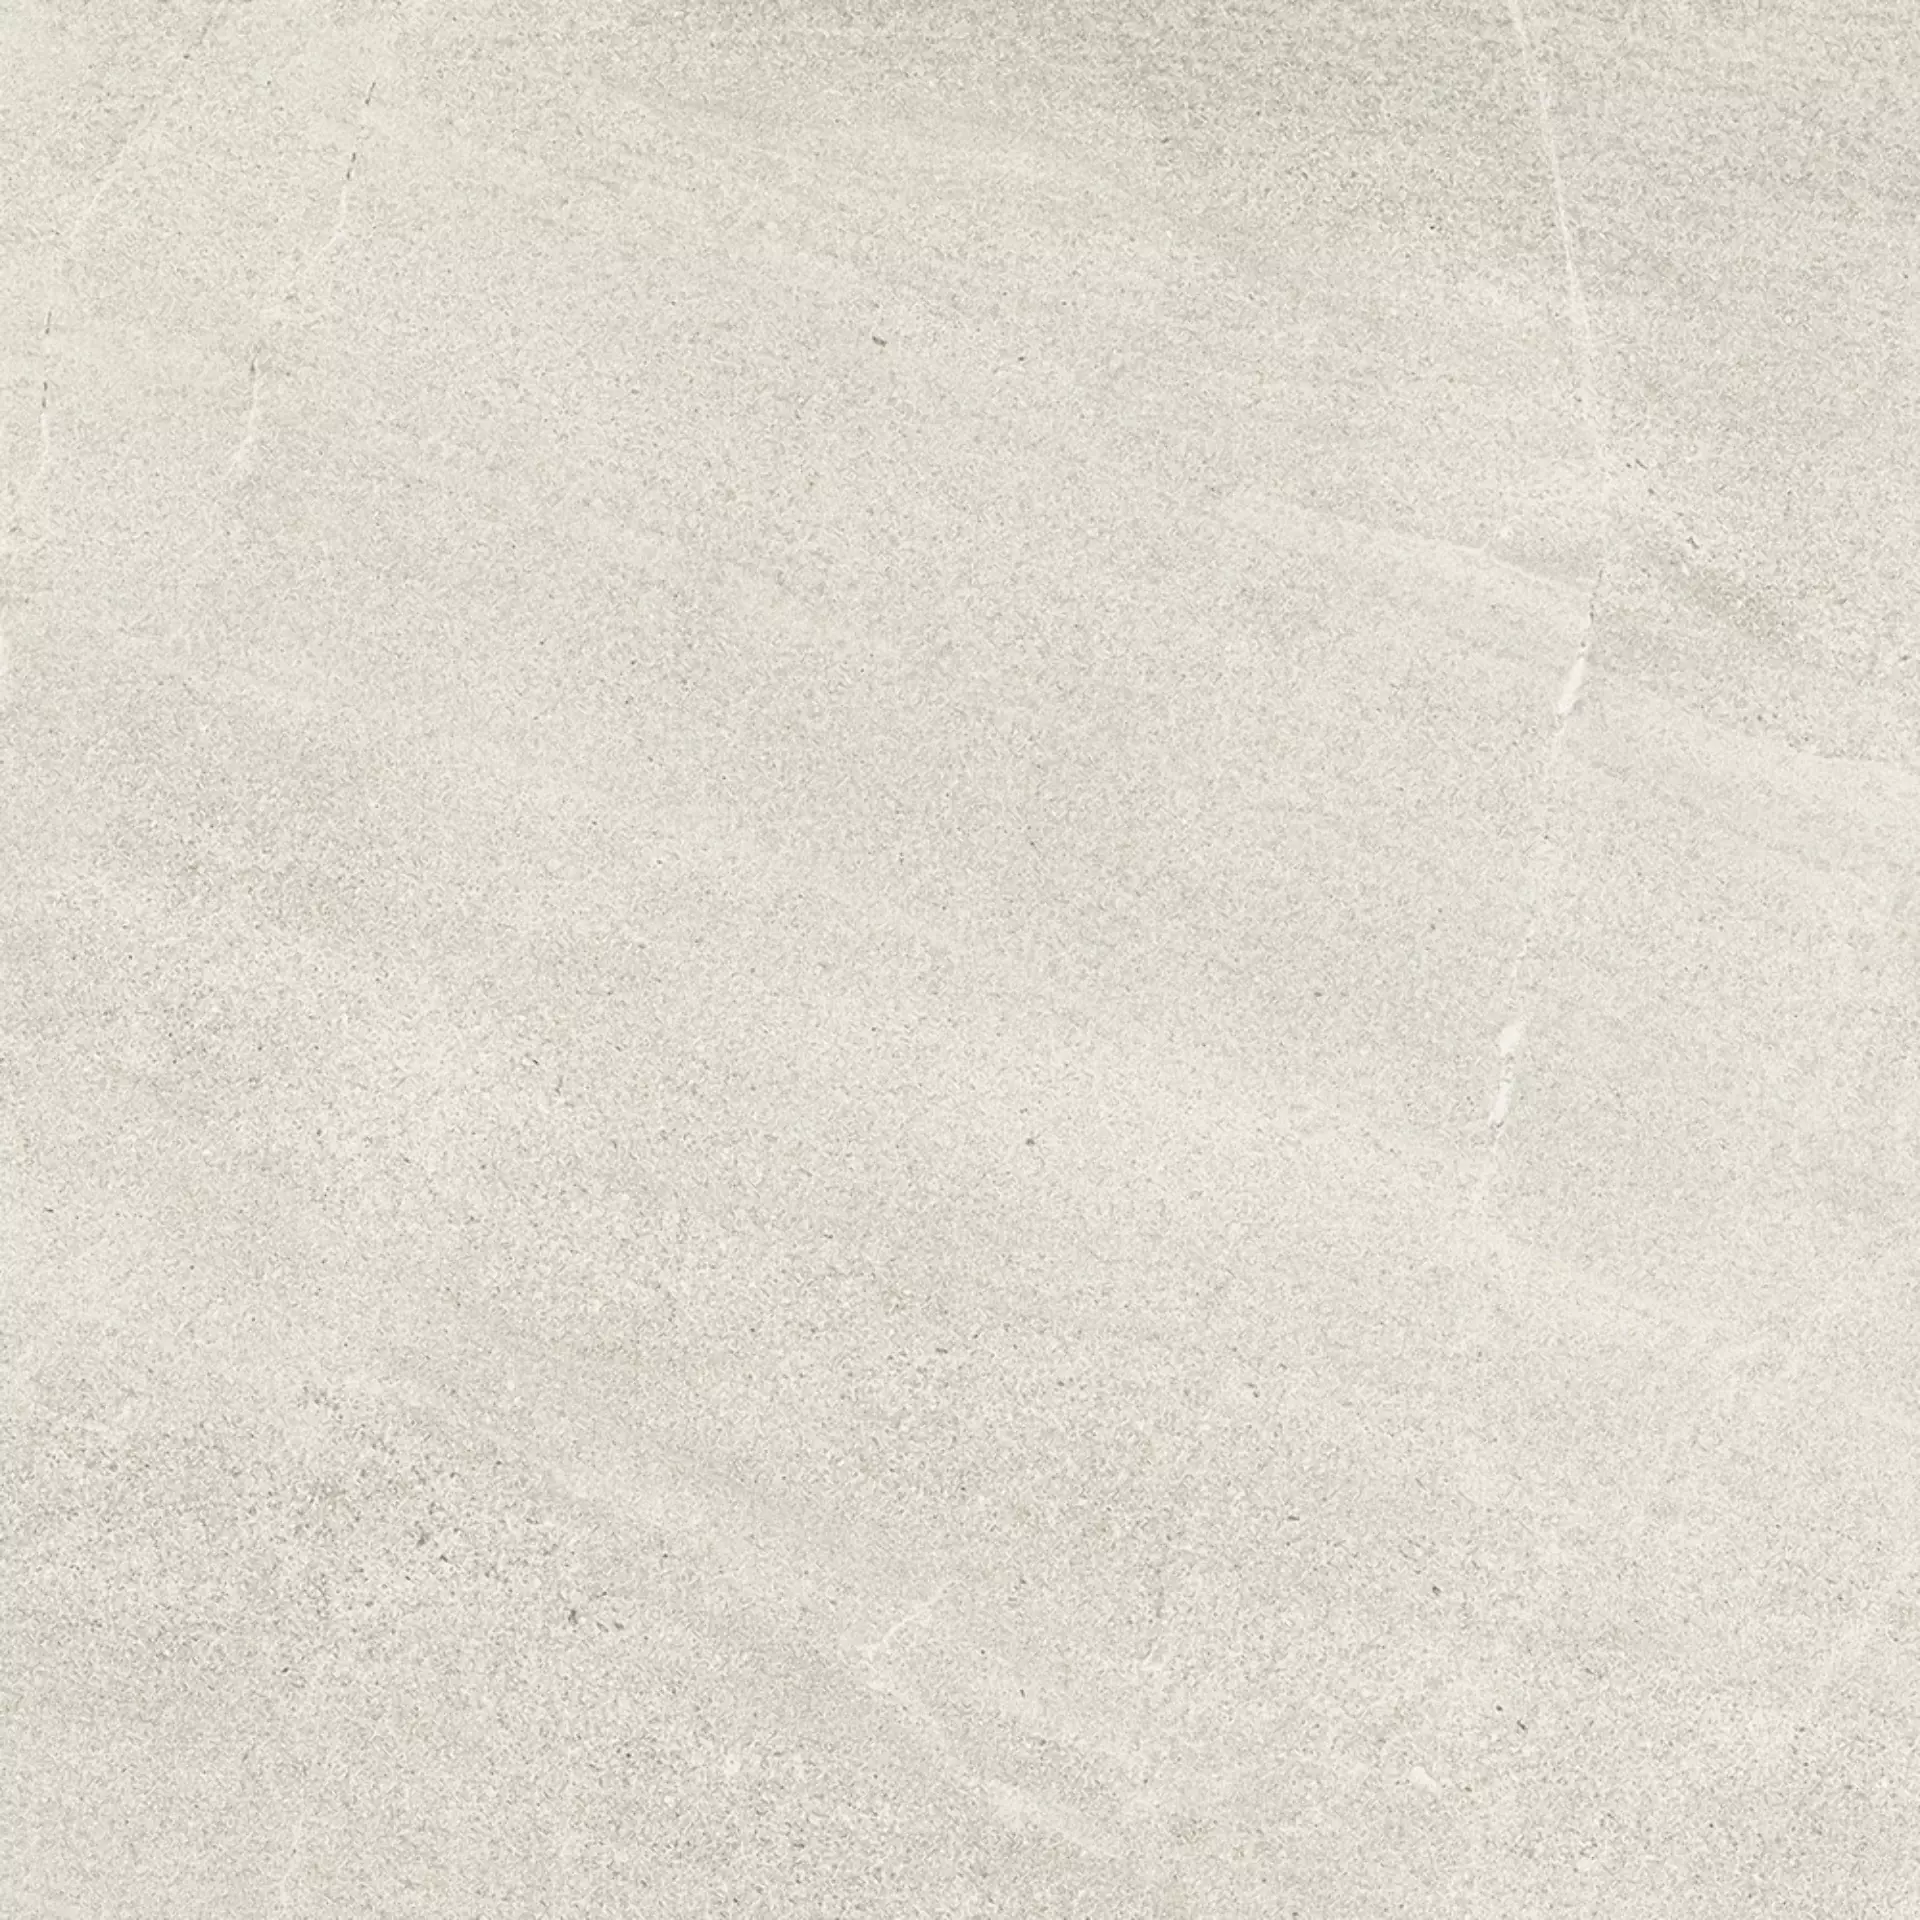 Cottodeste Limestone Clay Naturale Protect EGGLS10 90x90cm rectified 14mm